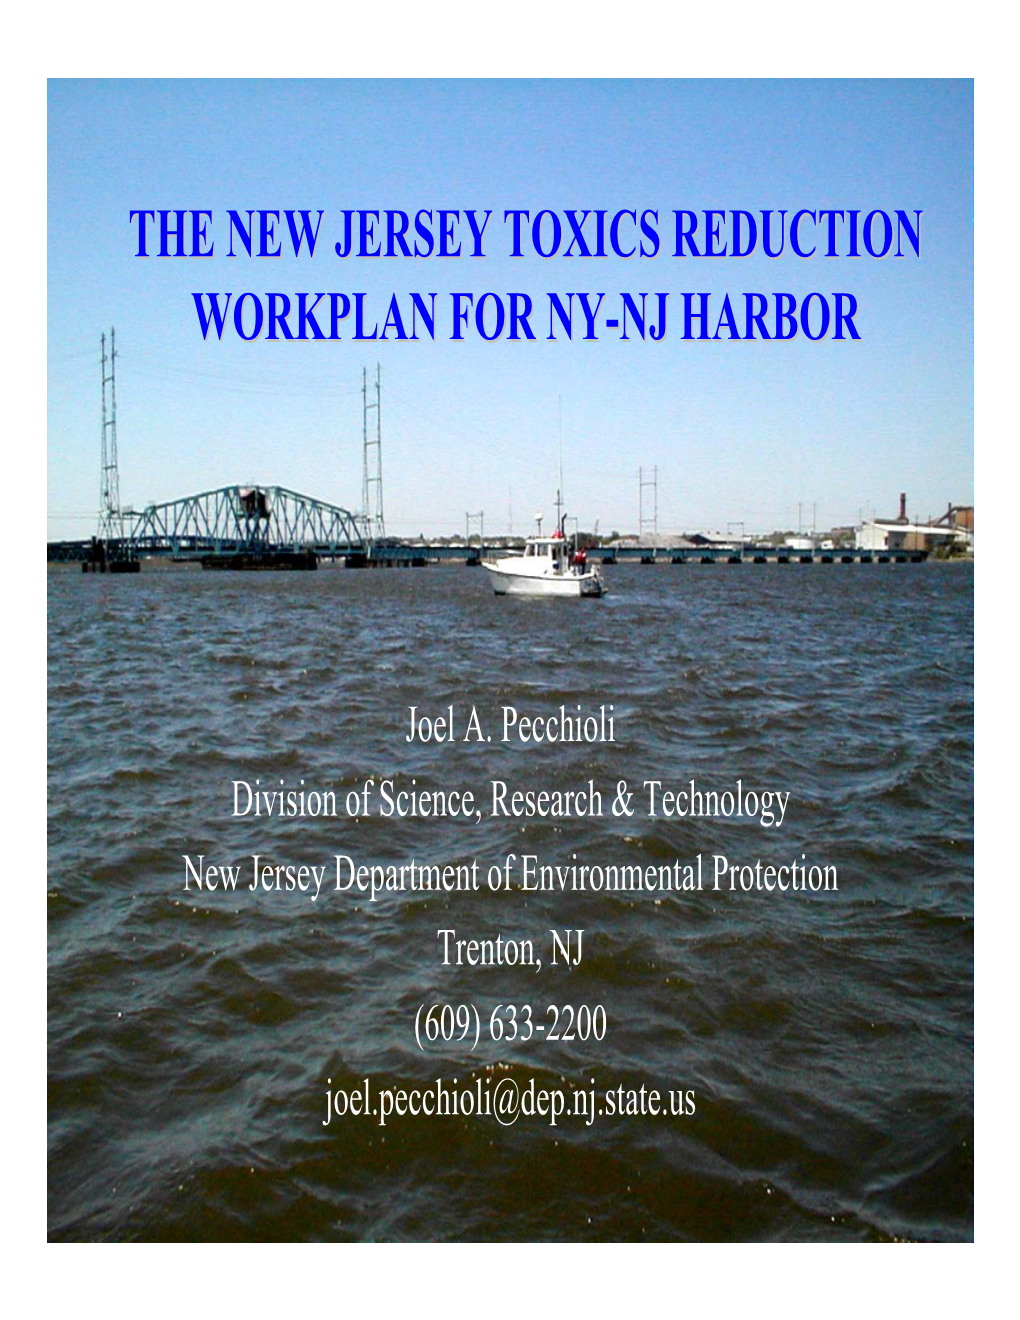 The New Jersey Toxics Reduction Workplan for Ny